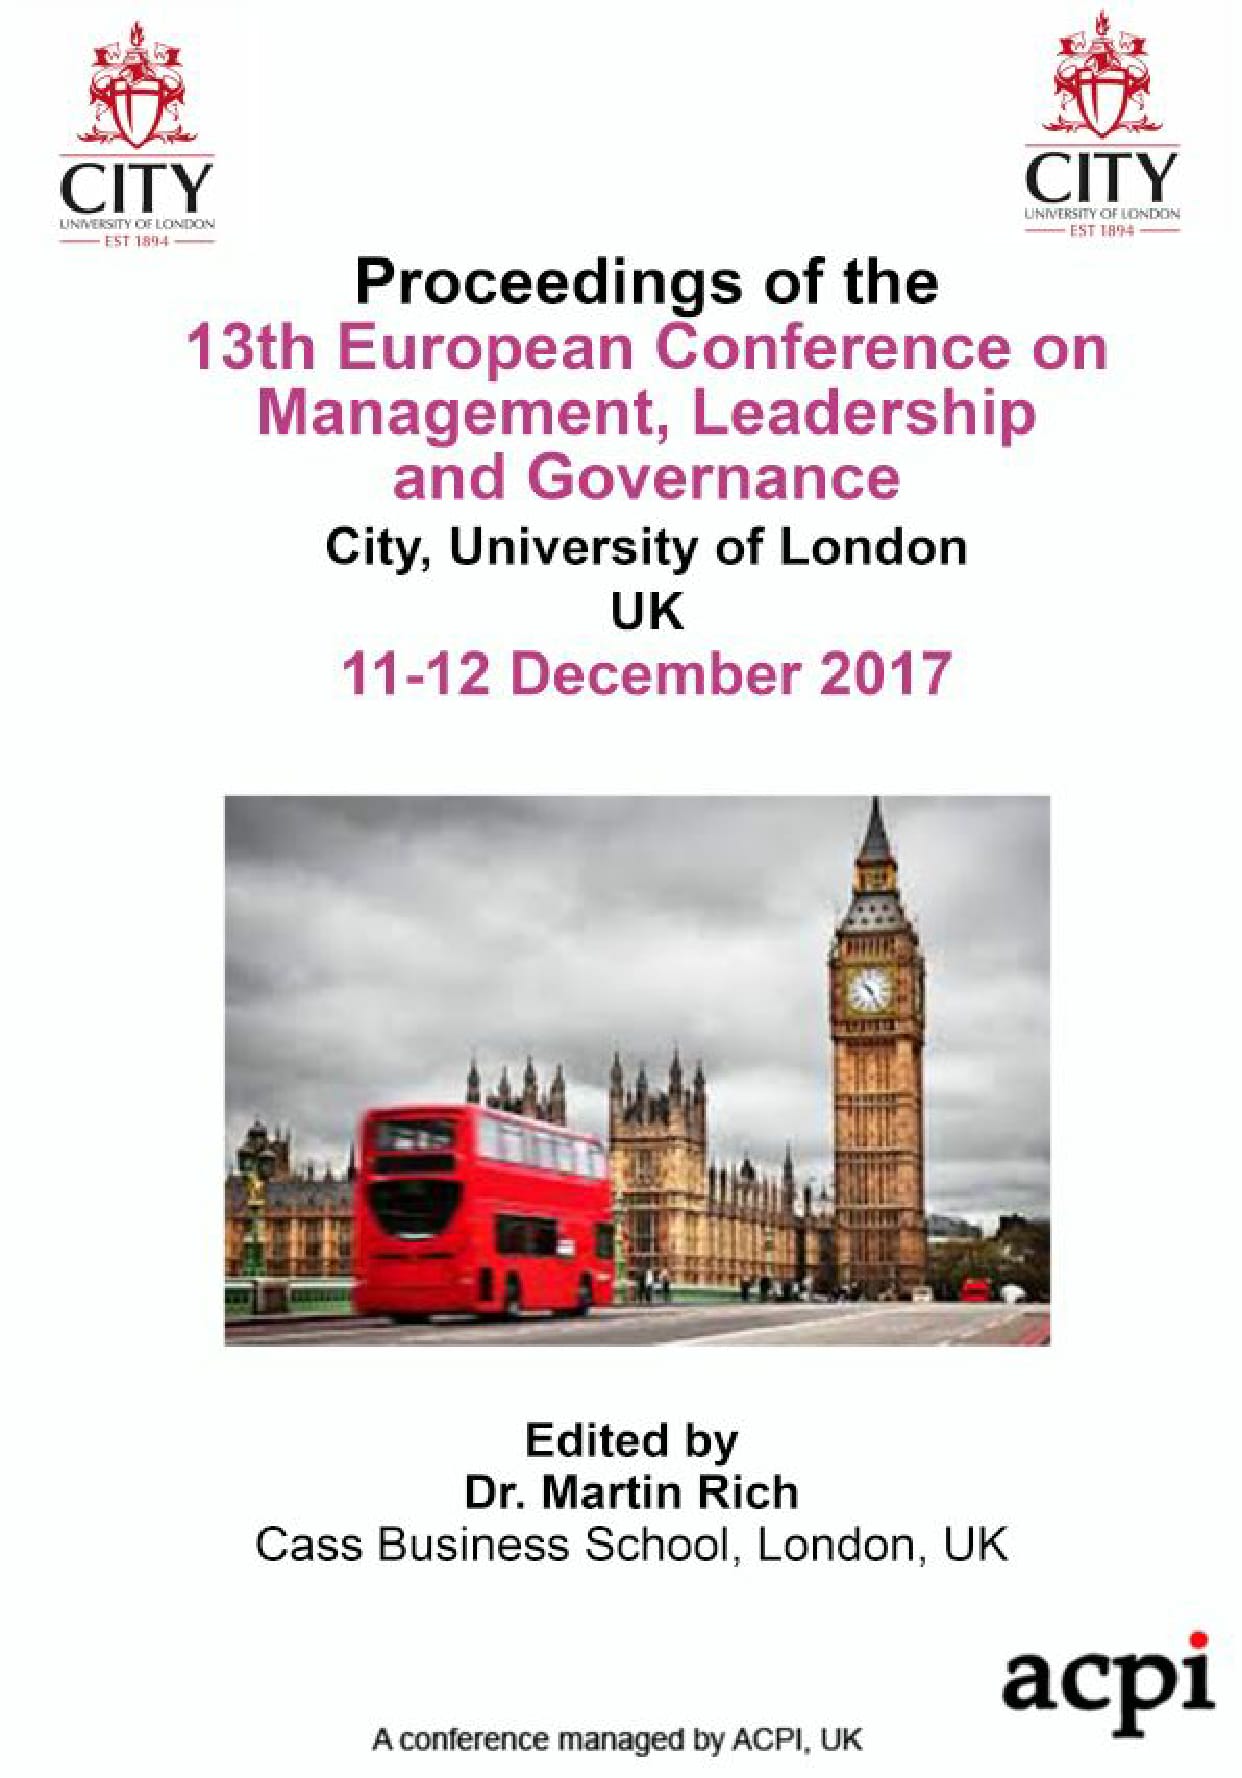 Proceedings of the 13th European Conference on Management, Leadership and Governance– ICMLG 2017, Cass Business School, City University London, 2017